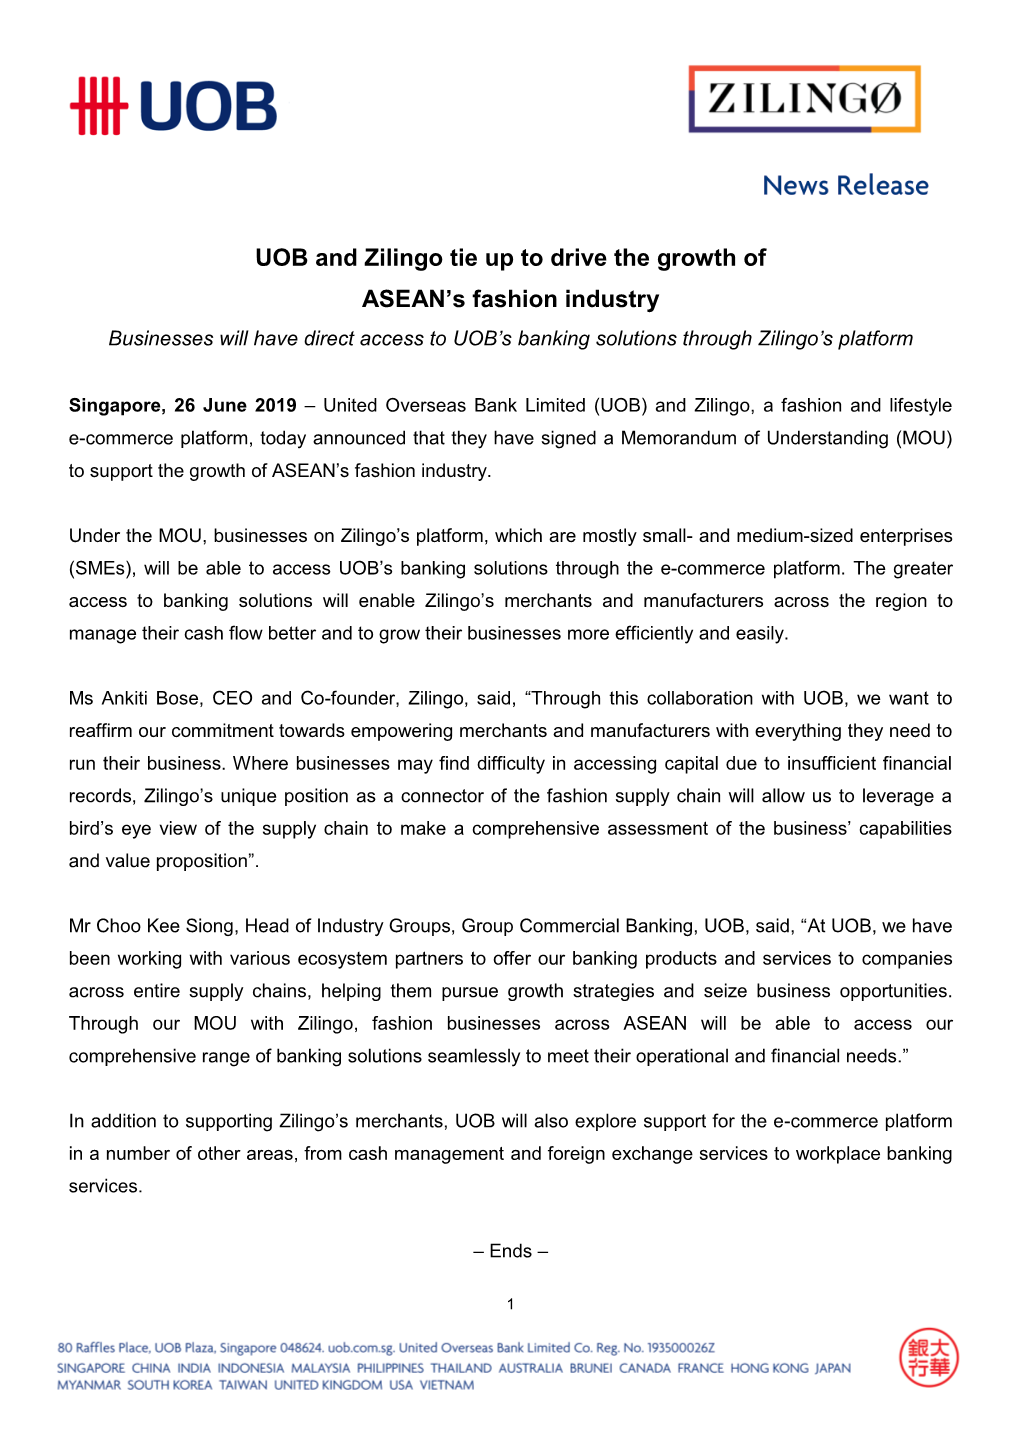 UOB and Zilingo Tie up to Drive the Growth of ASEAN's Growth Industry